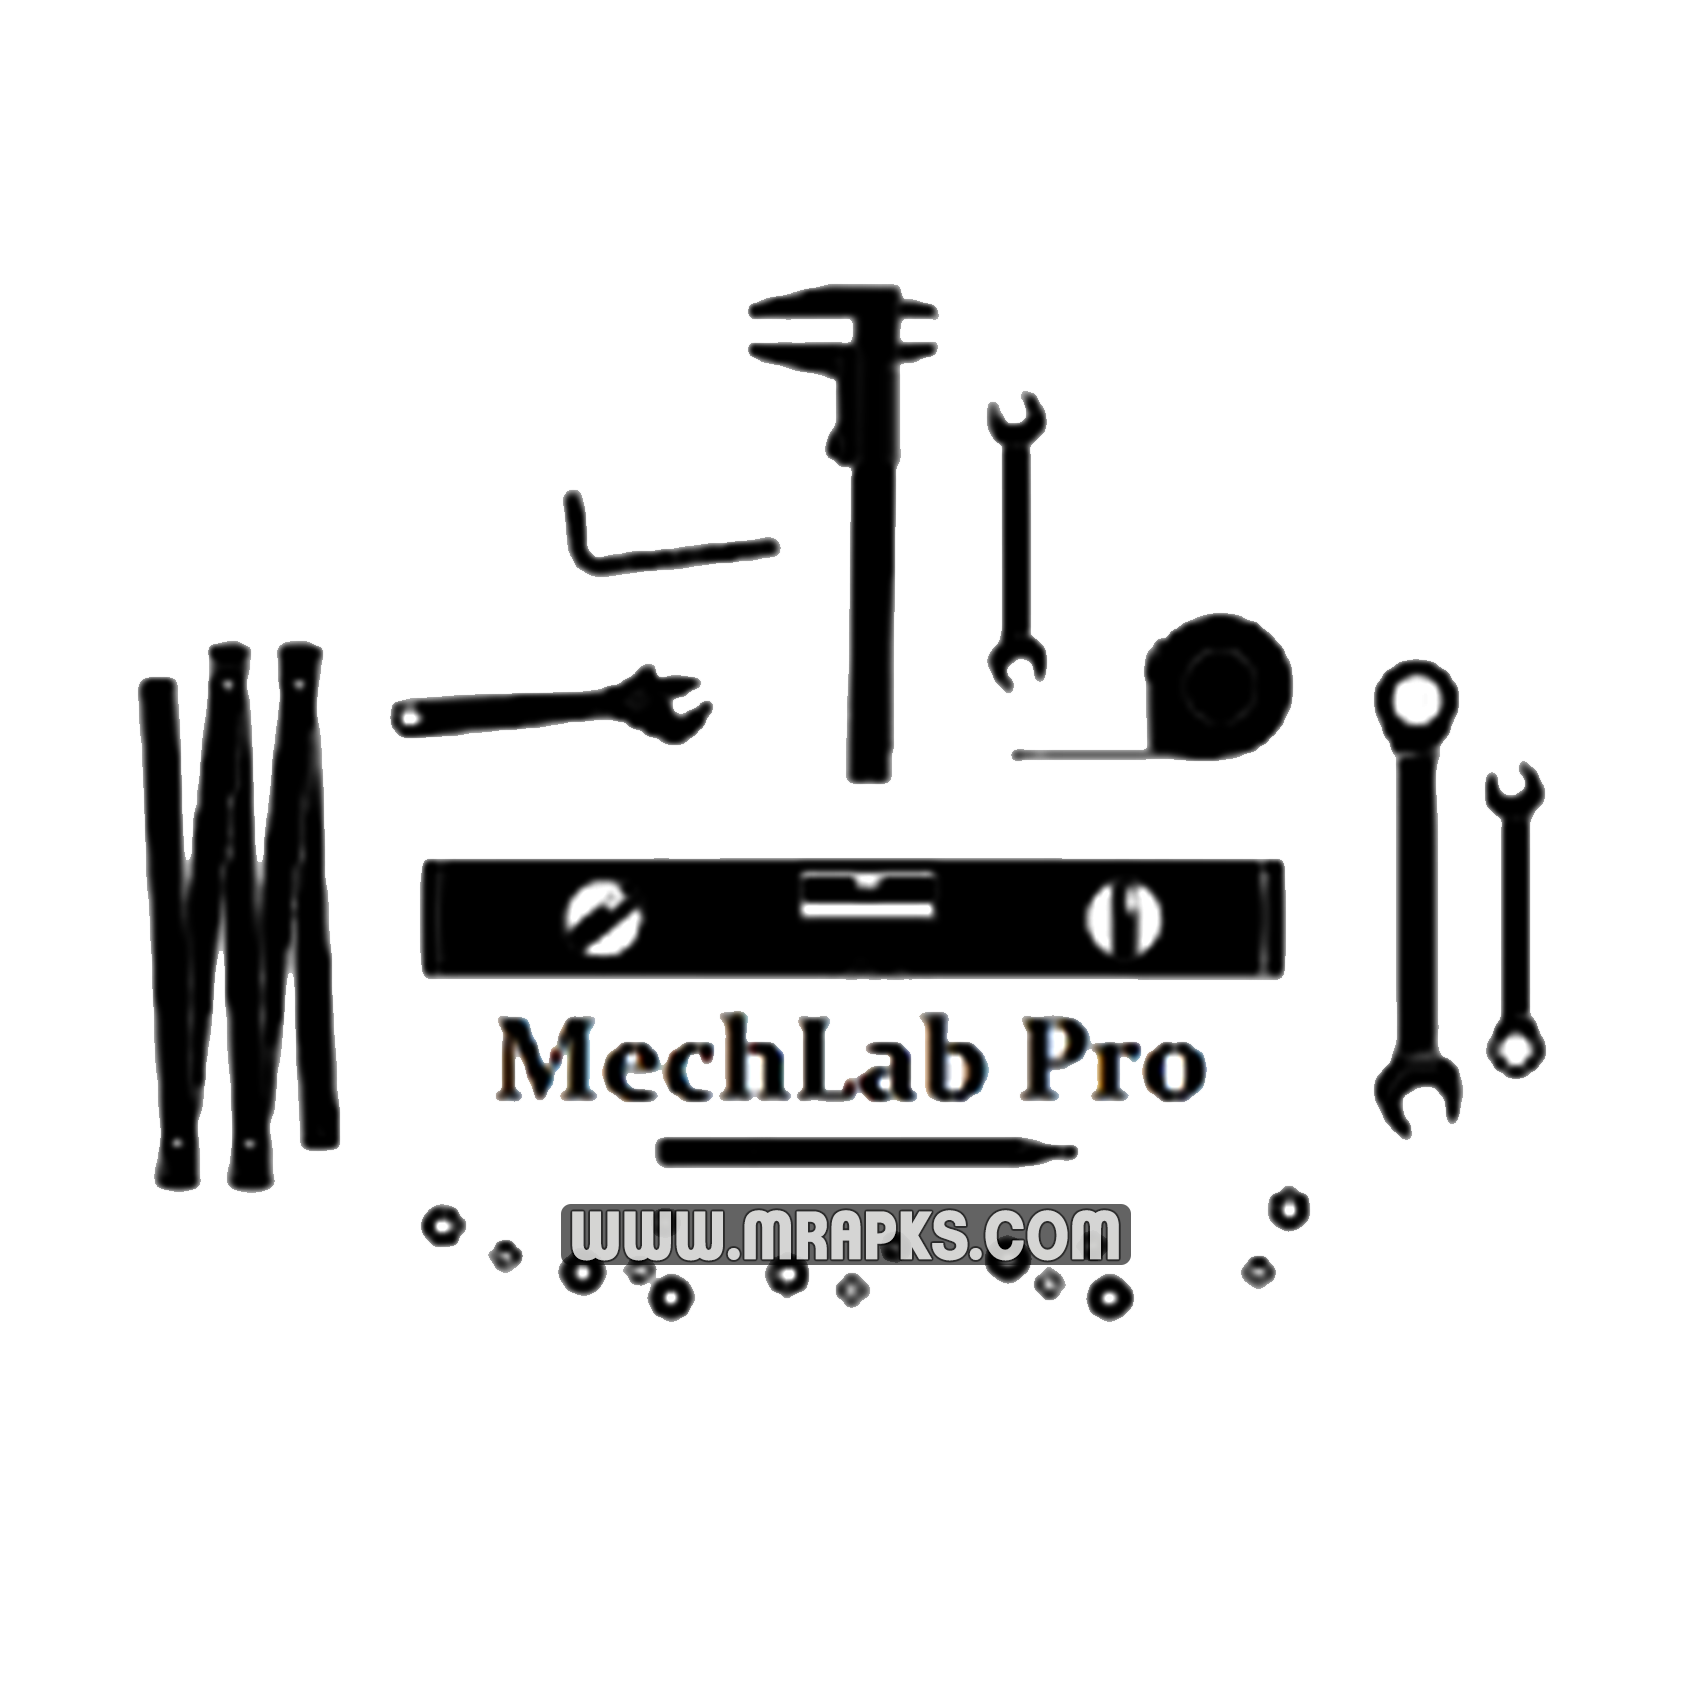 MechLab Pro – smart Tools for engineers v1.2 (Paid) APK